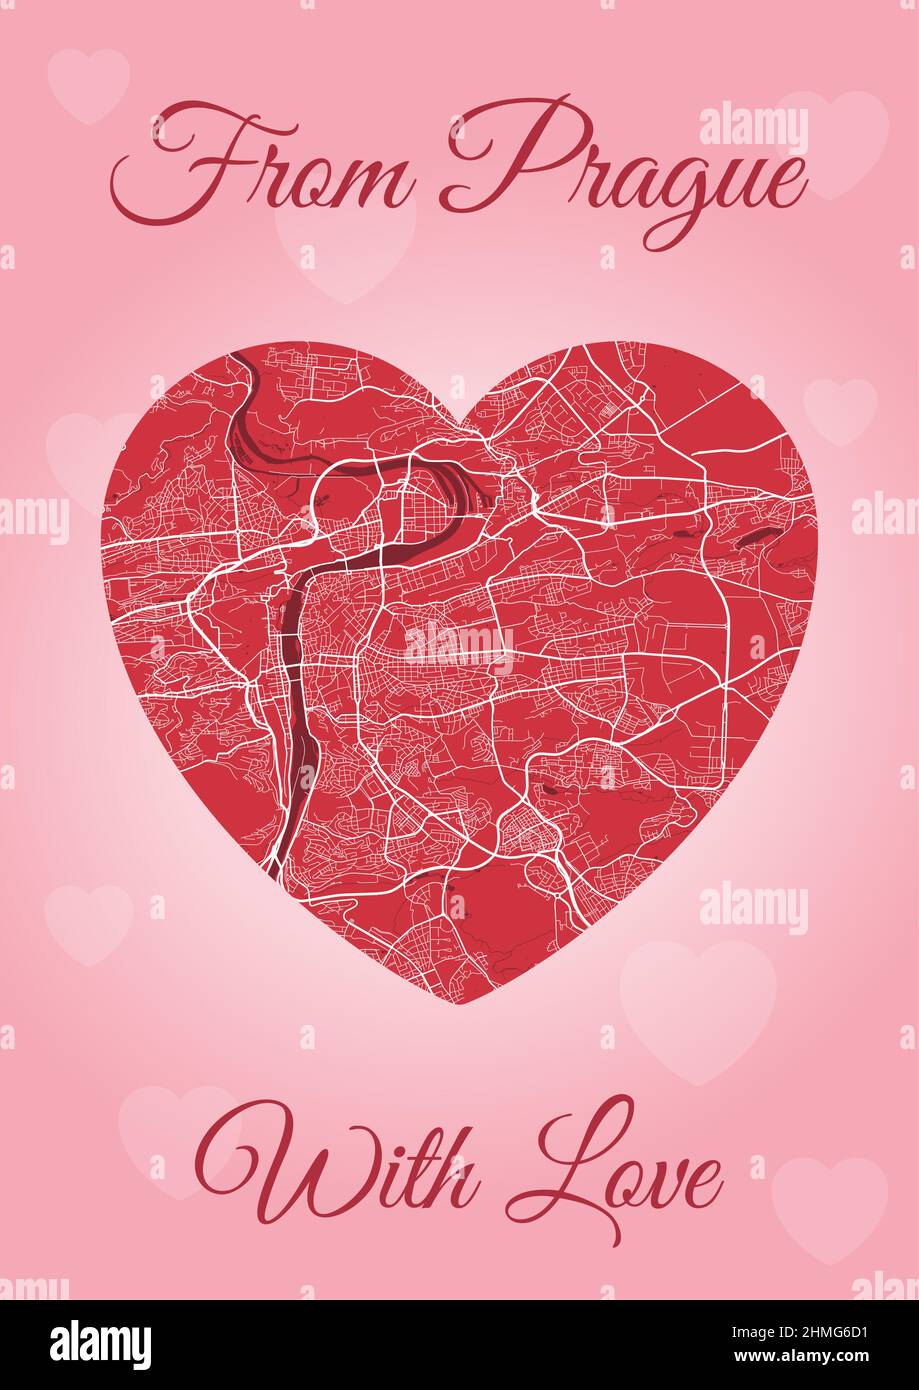 From Prague with love card, city map in heart shape. Vertical A4 Pink and red color vector illustration. Love city travel cityscape. Stock Vector